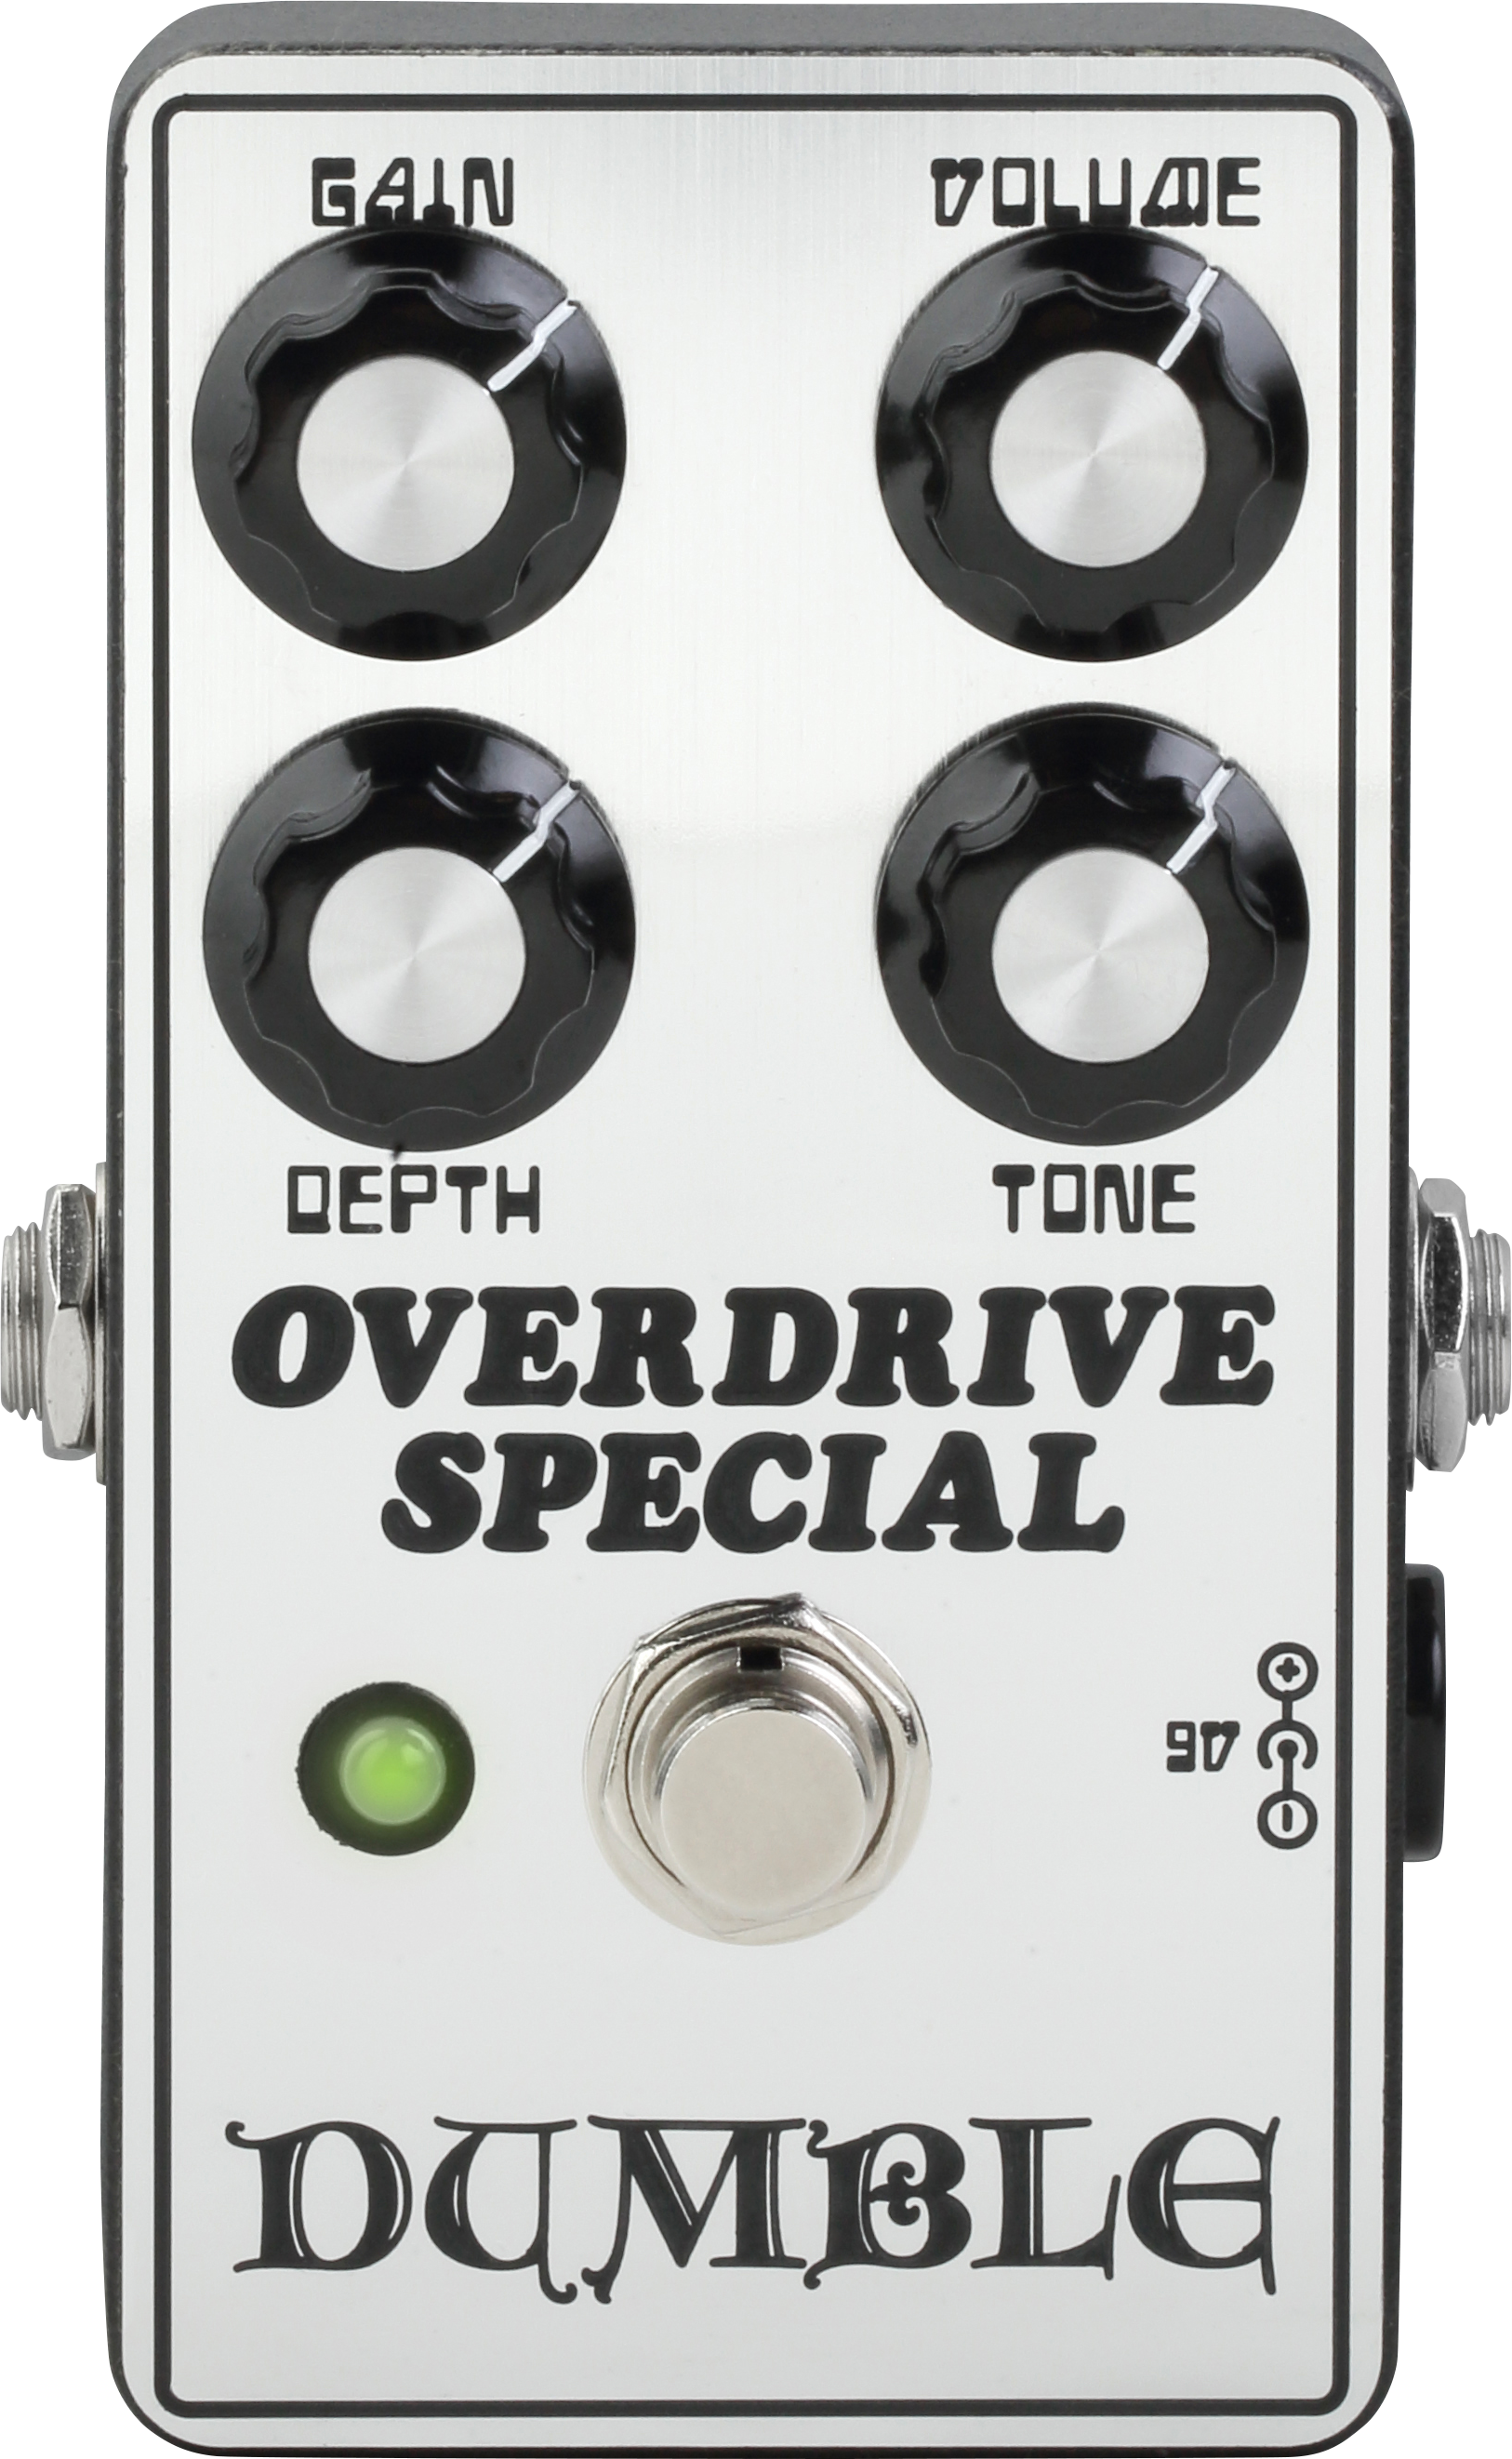 BRITISH PEDAL COMPANY DUMBLE SILVERFACE OVERDRIVE SPECIAL PEDAL